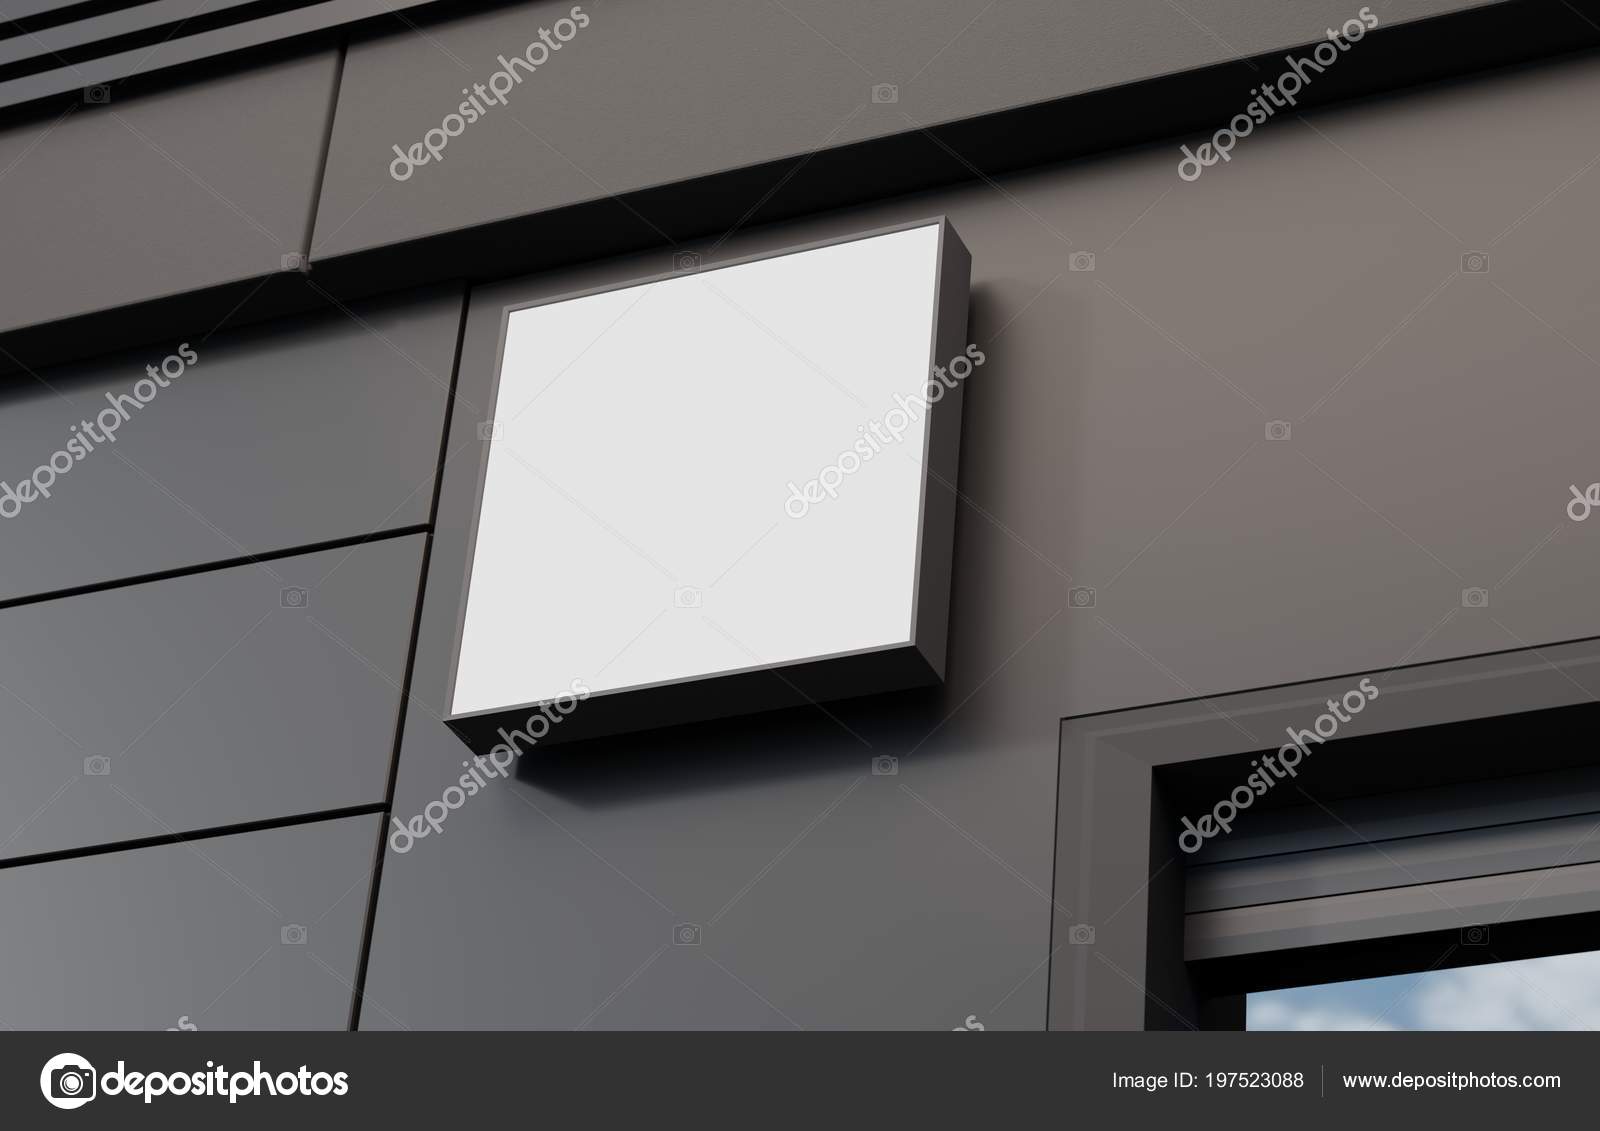 Download Blank Outdoor Signage Signboard Mockup Sign Mounted Building Logo Presentation Royalty Free Photo Stock Image By C Barbra Ford 197523088